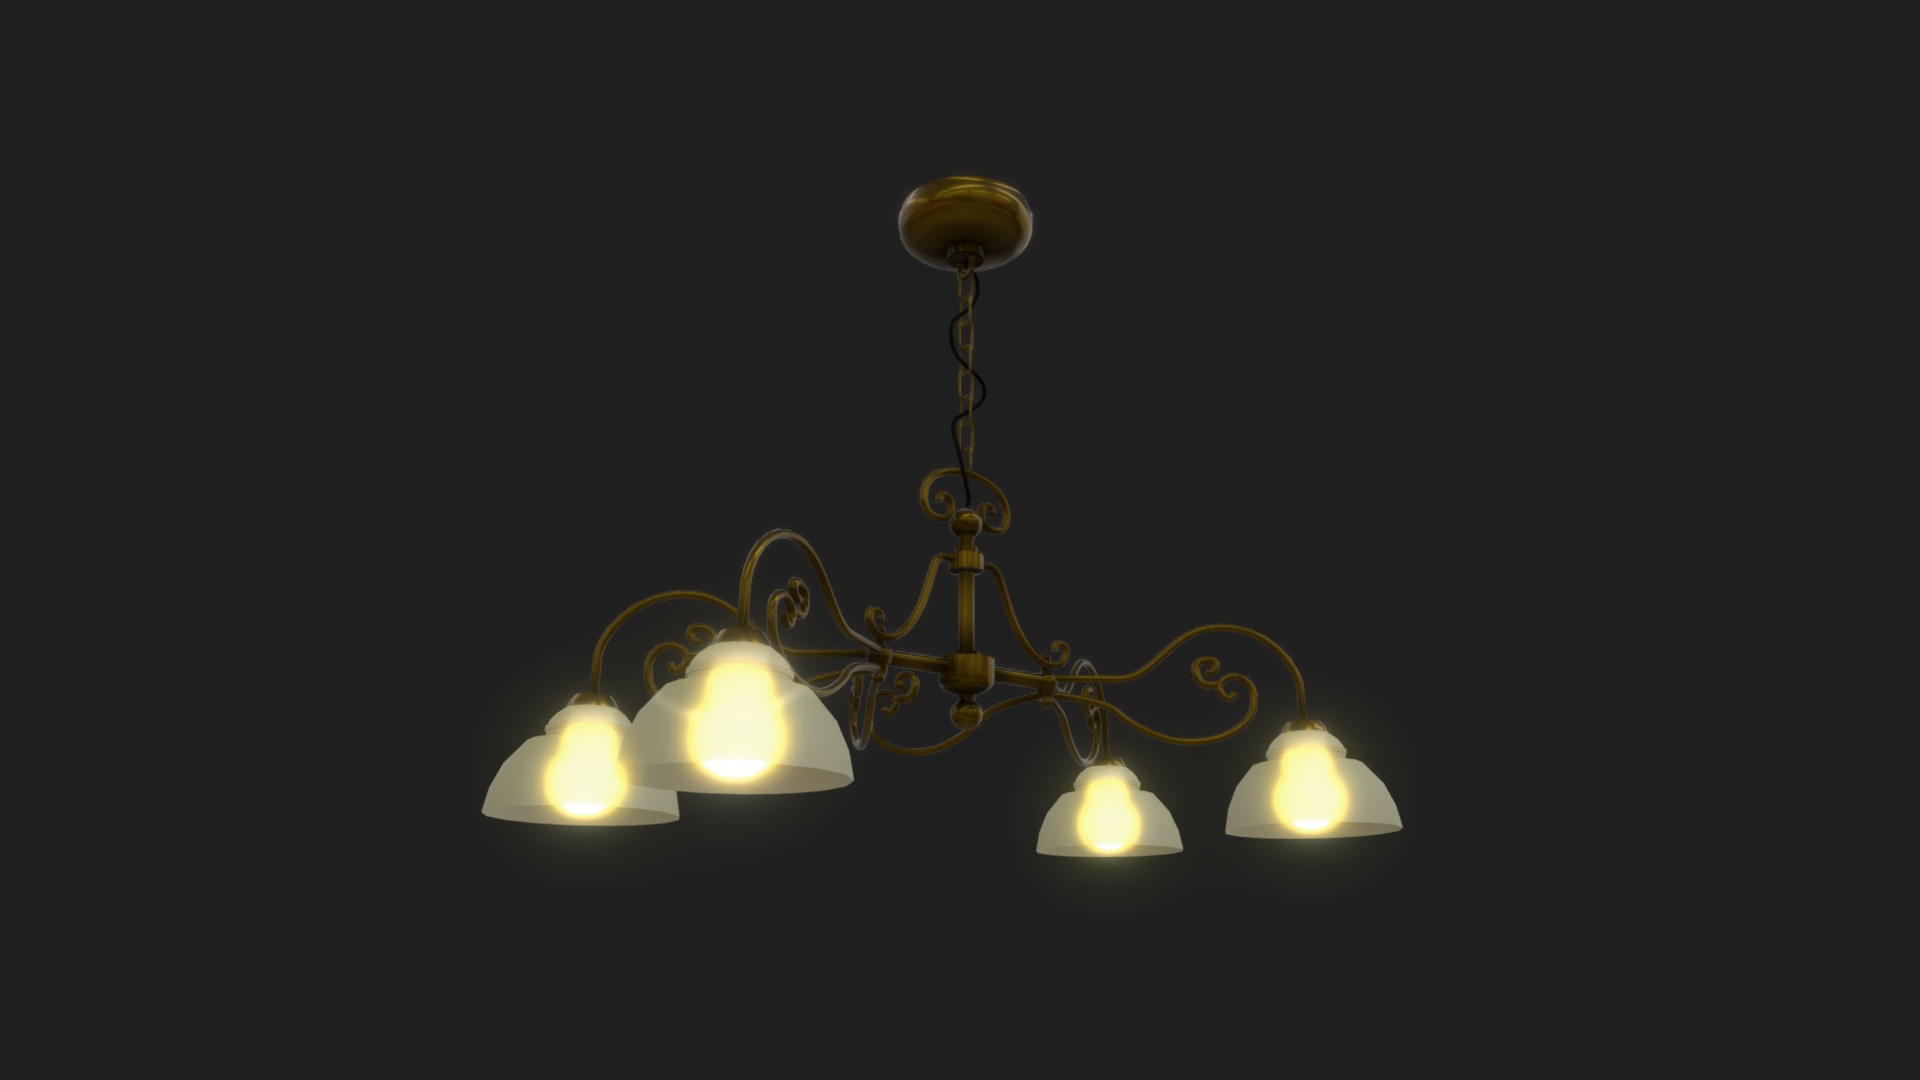 3D model HGPRG1901 - This is a 3D model of the HGPRG1901. The 3D model is about a chandelier with light bulbs.